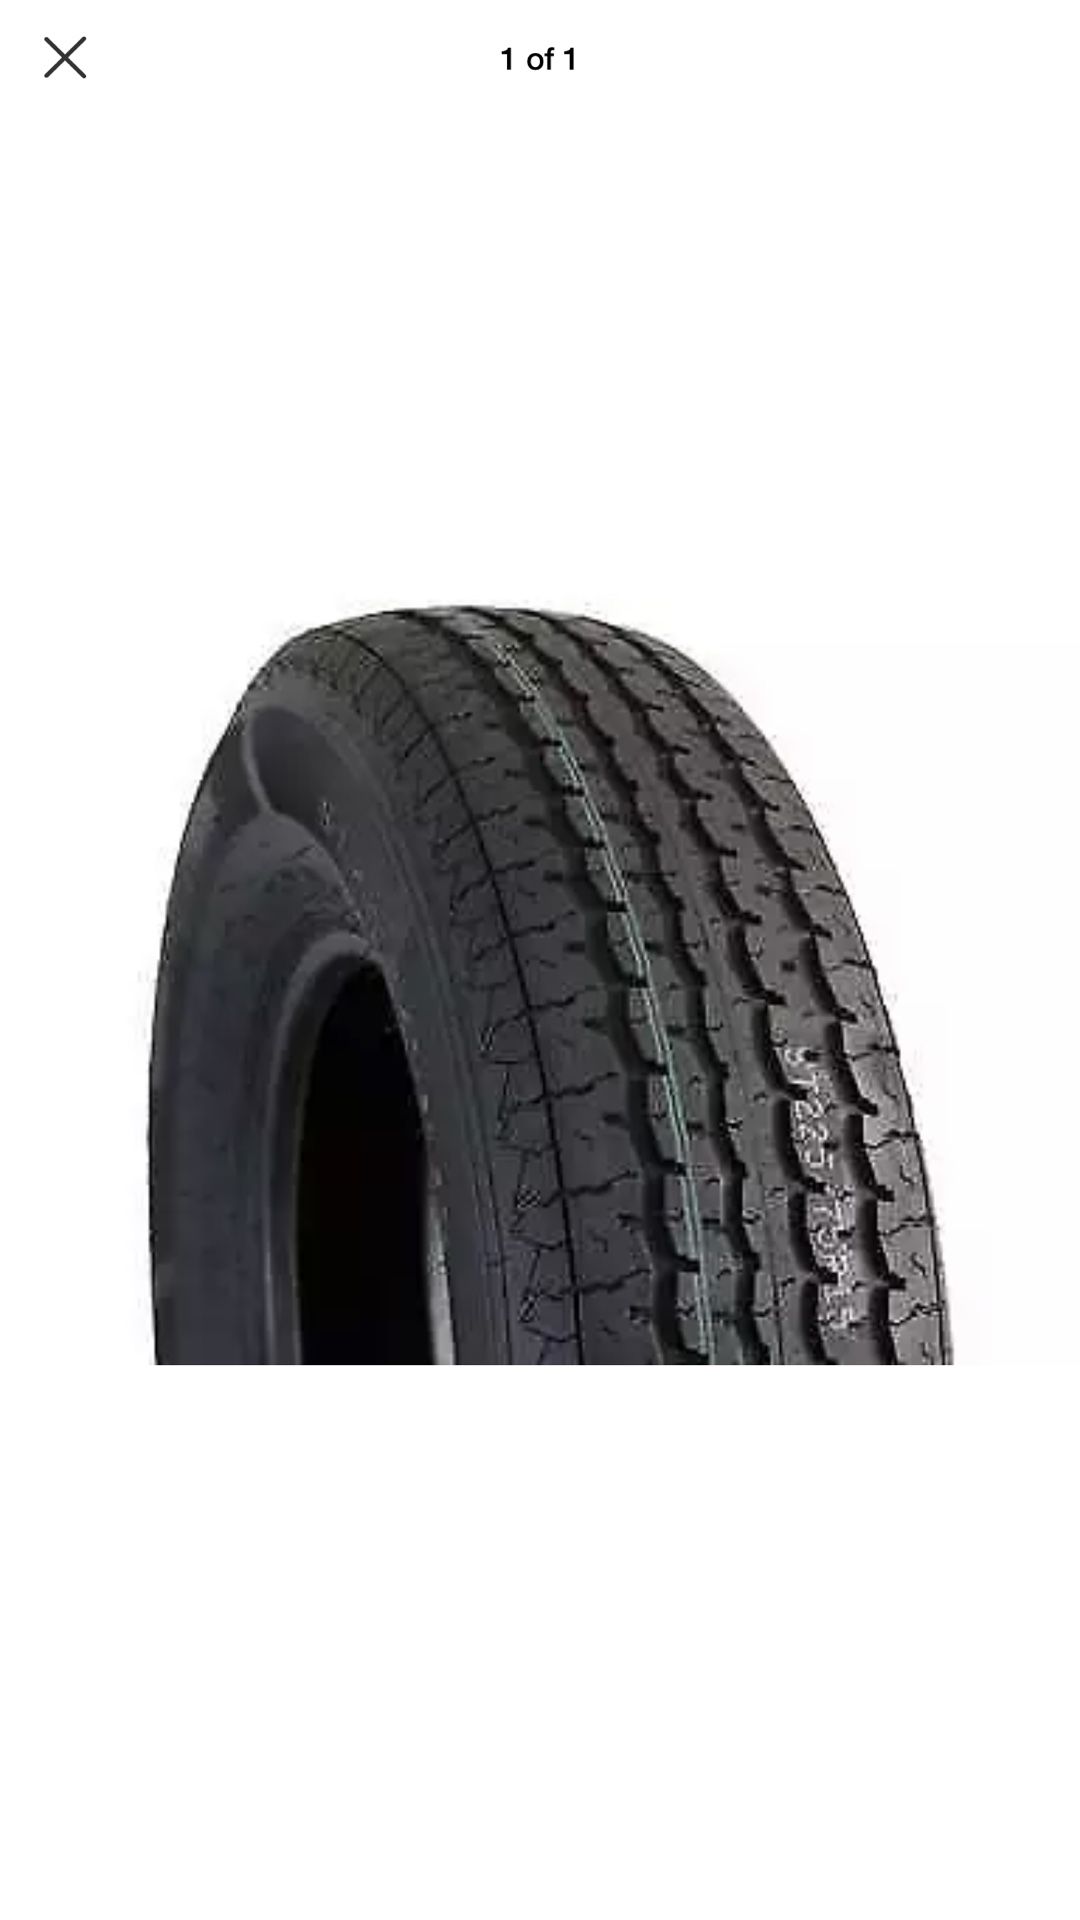 ~1 New ST235/85R16 LRE 10 Ply Velocity Radial Trailer 2358516 235 85 16 R16 Tire